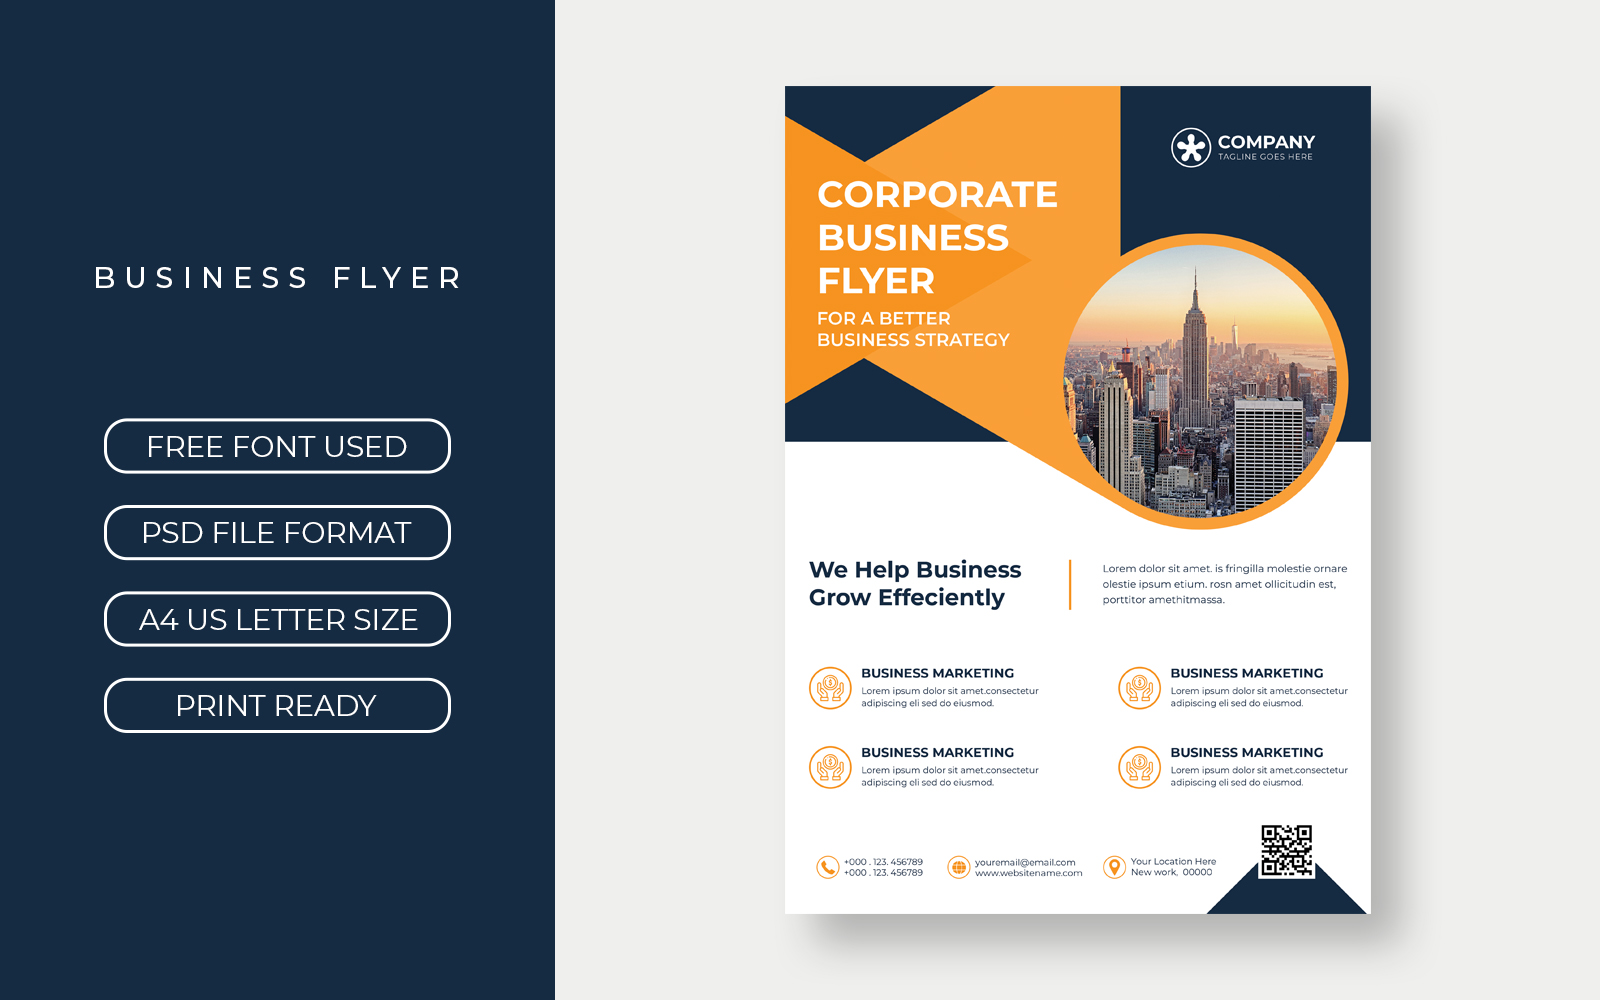 Corporate Business Flyer Layout Design